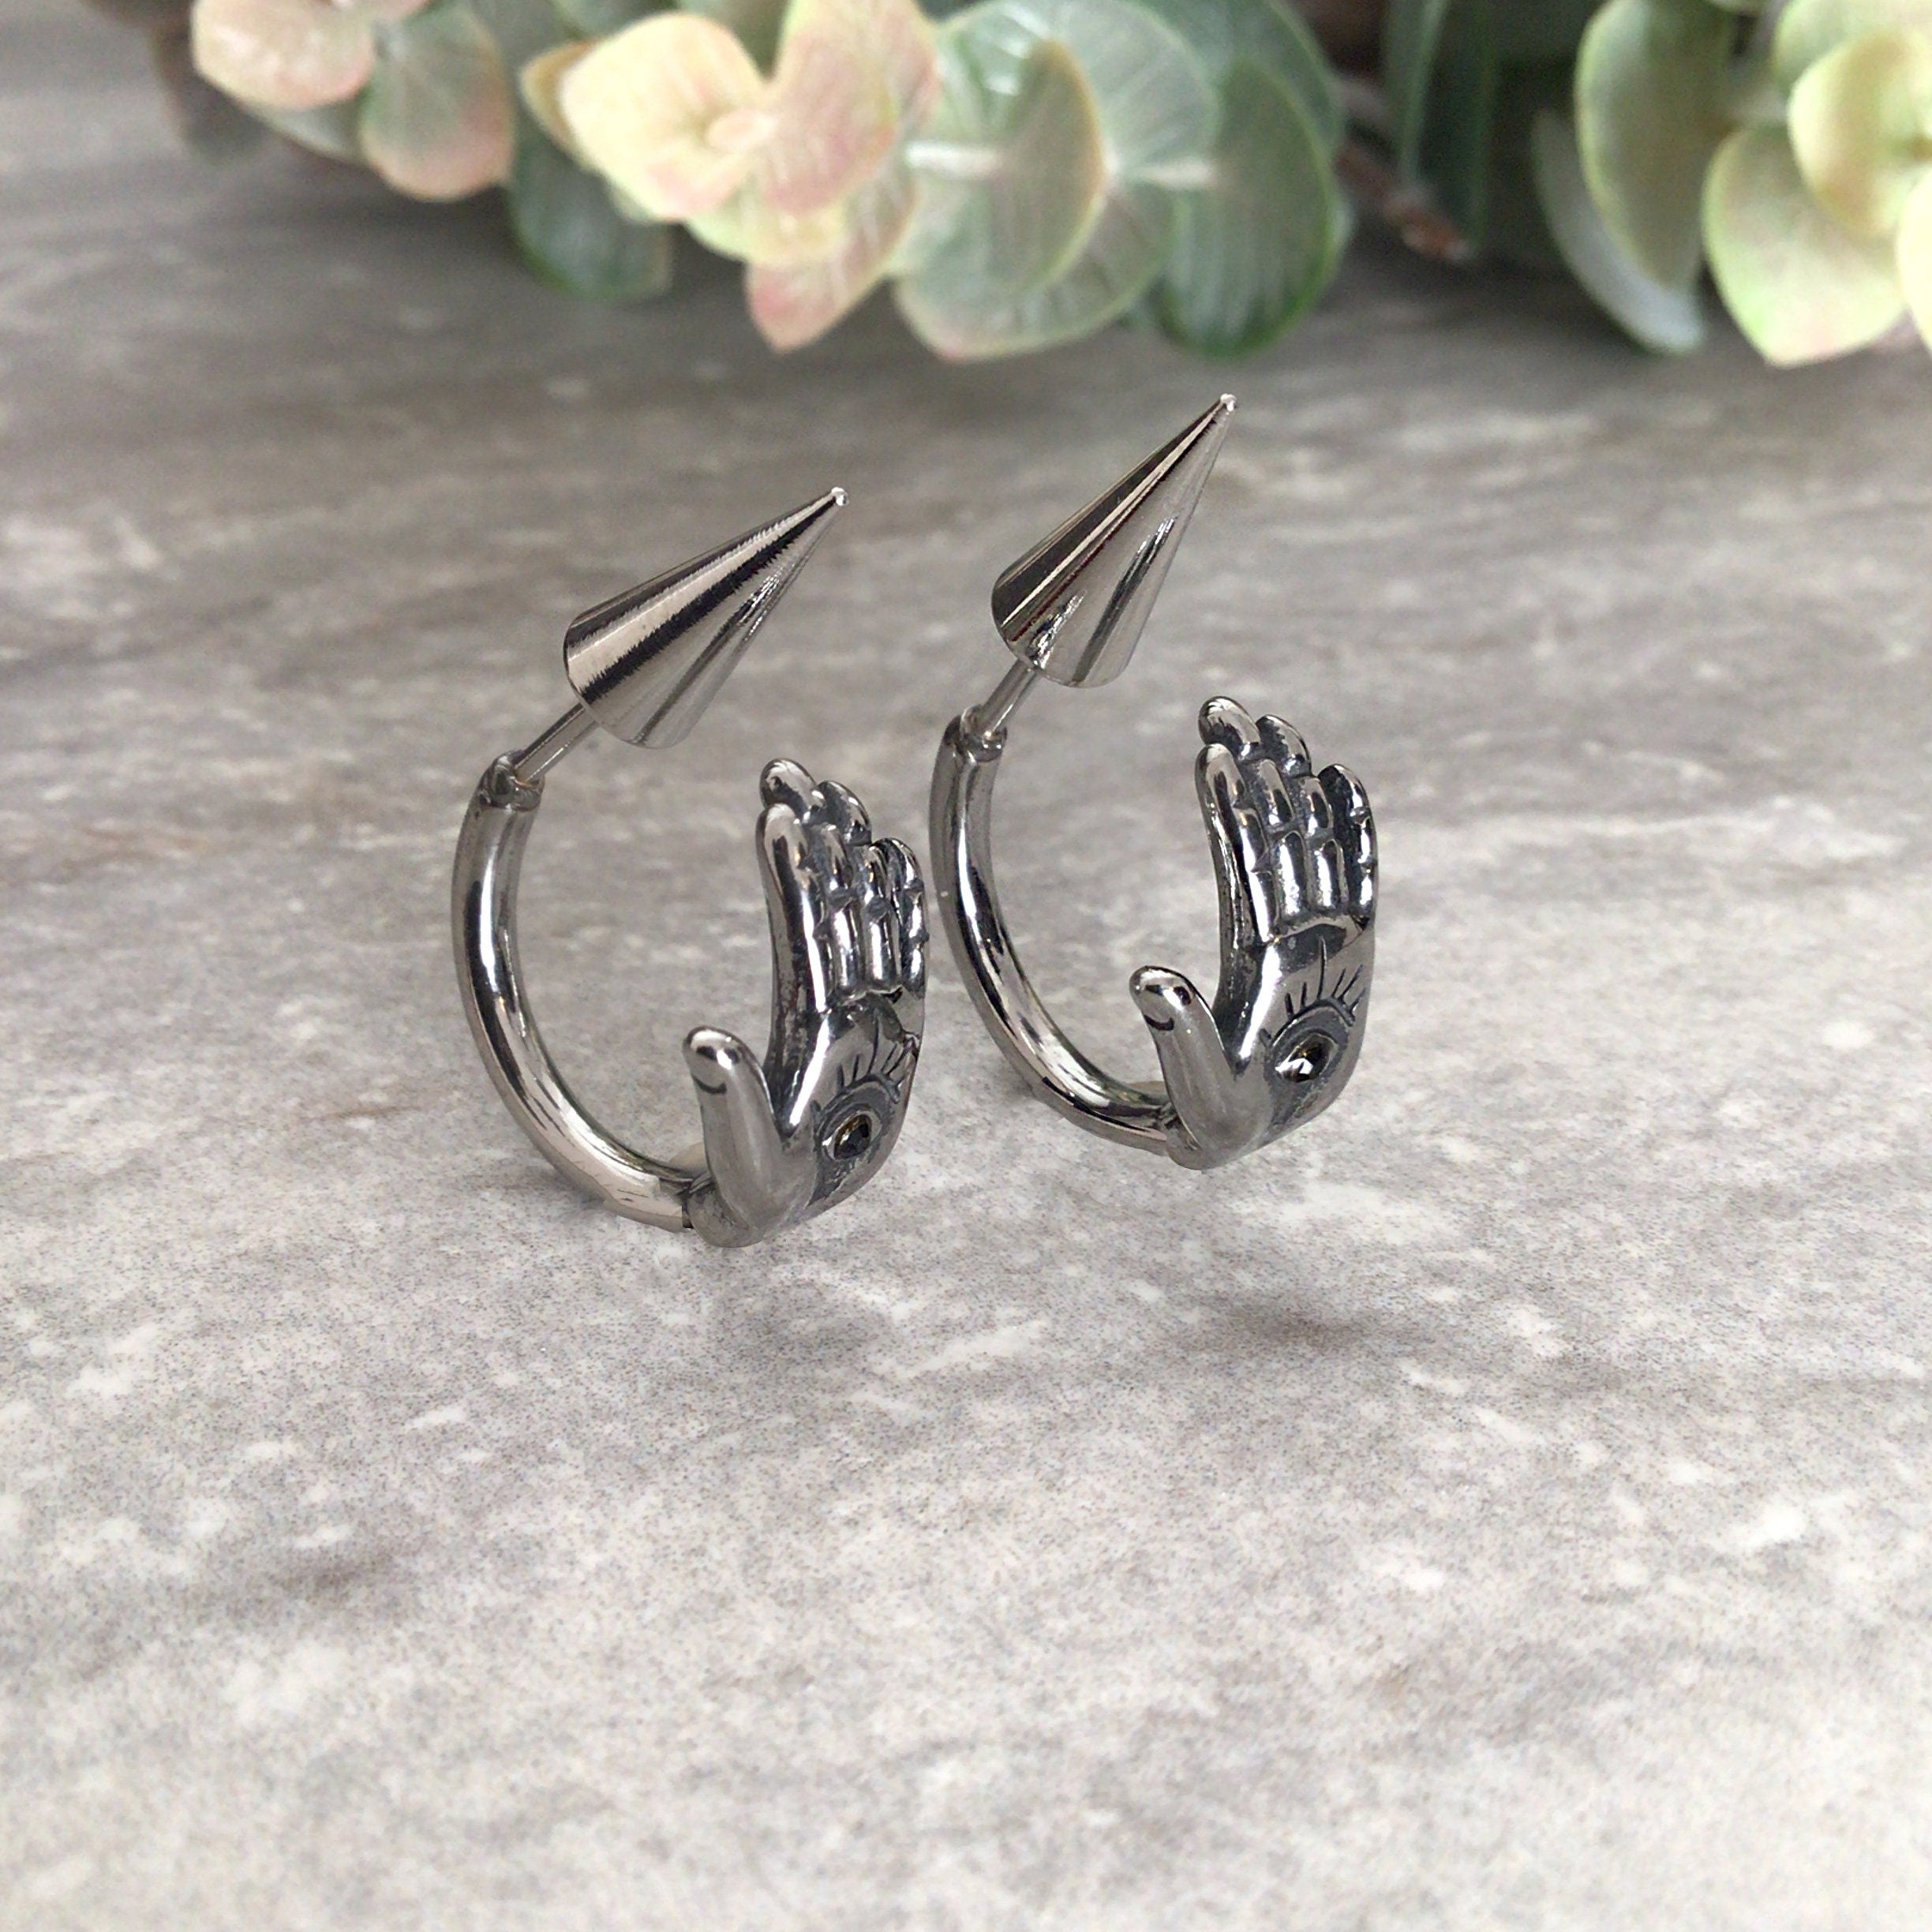 HAND PROTECTION EARRINGS